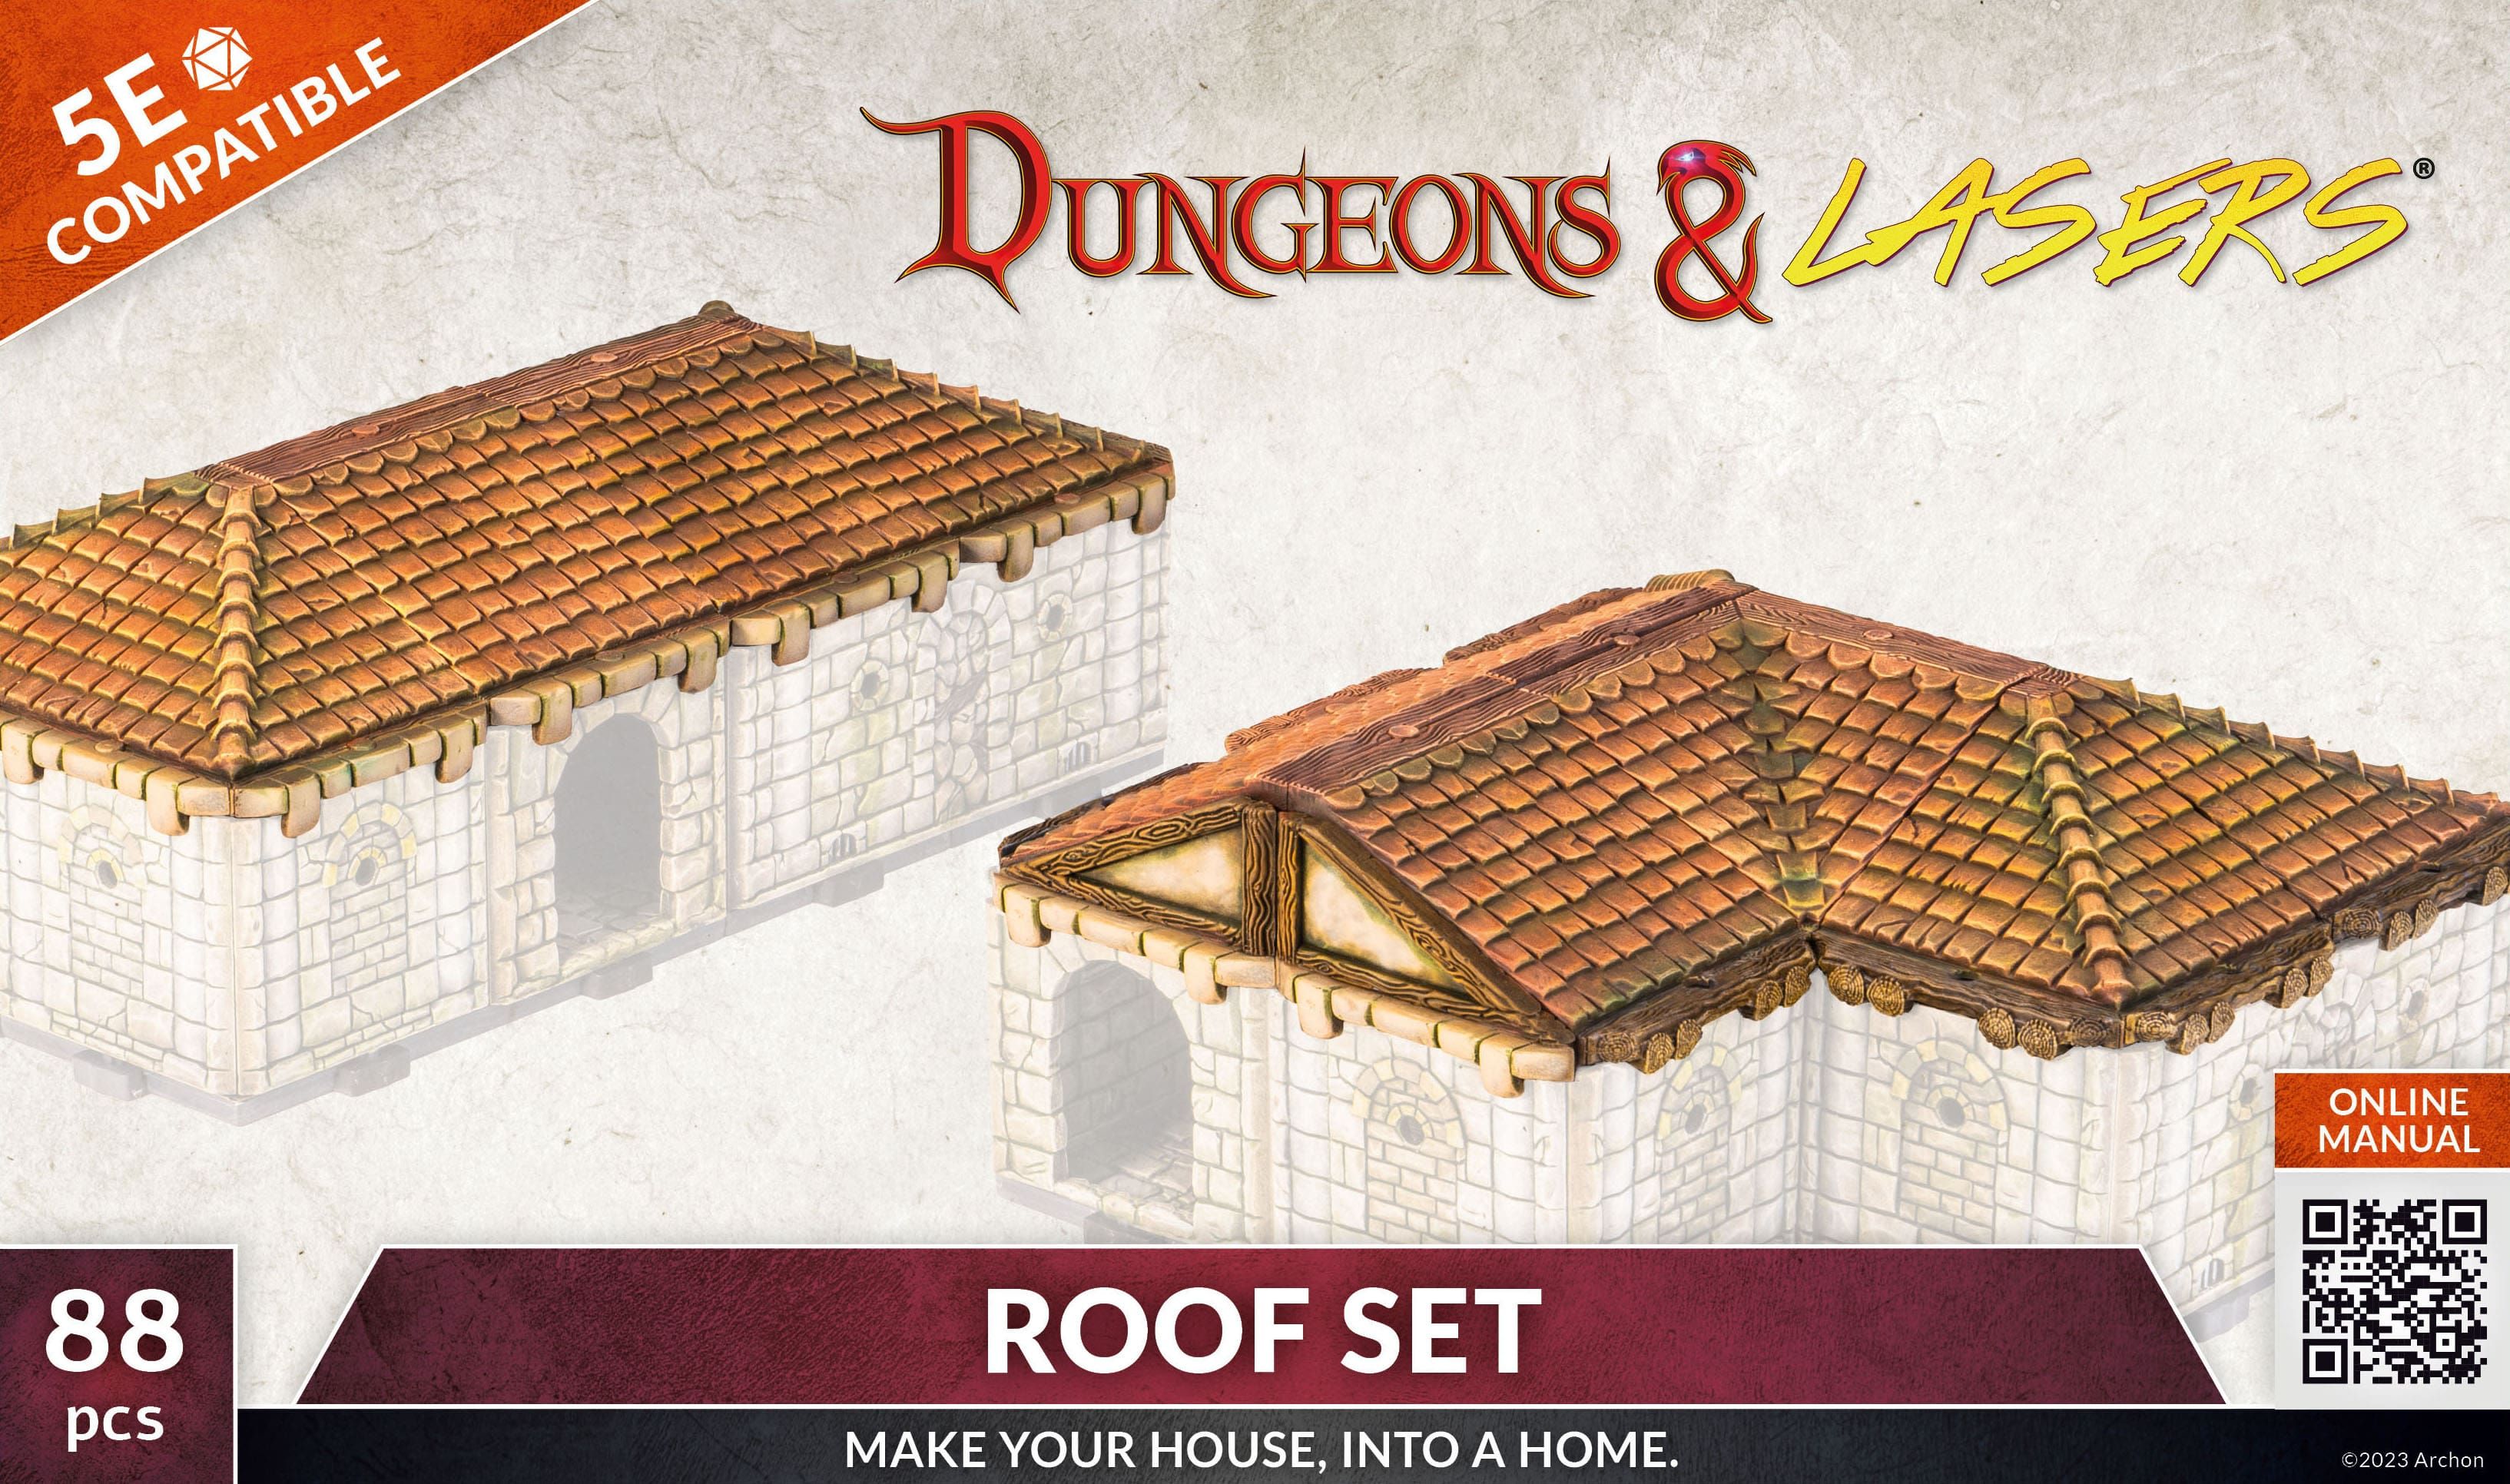 Dungeons & Lasers: Roof Set 